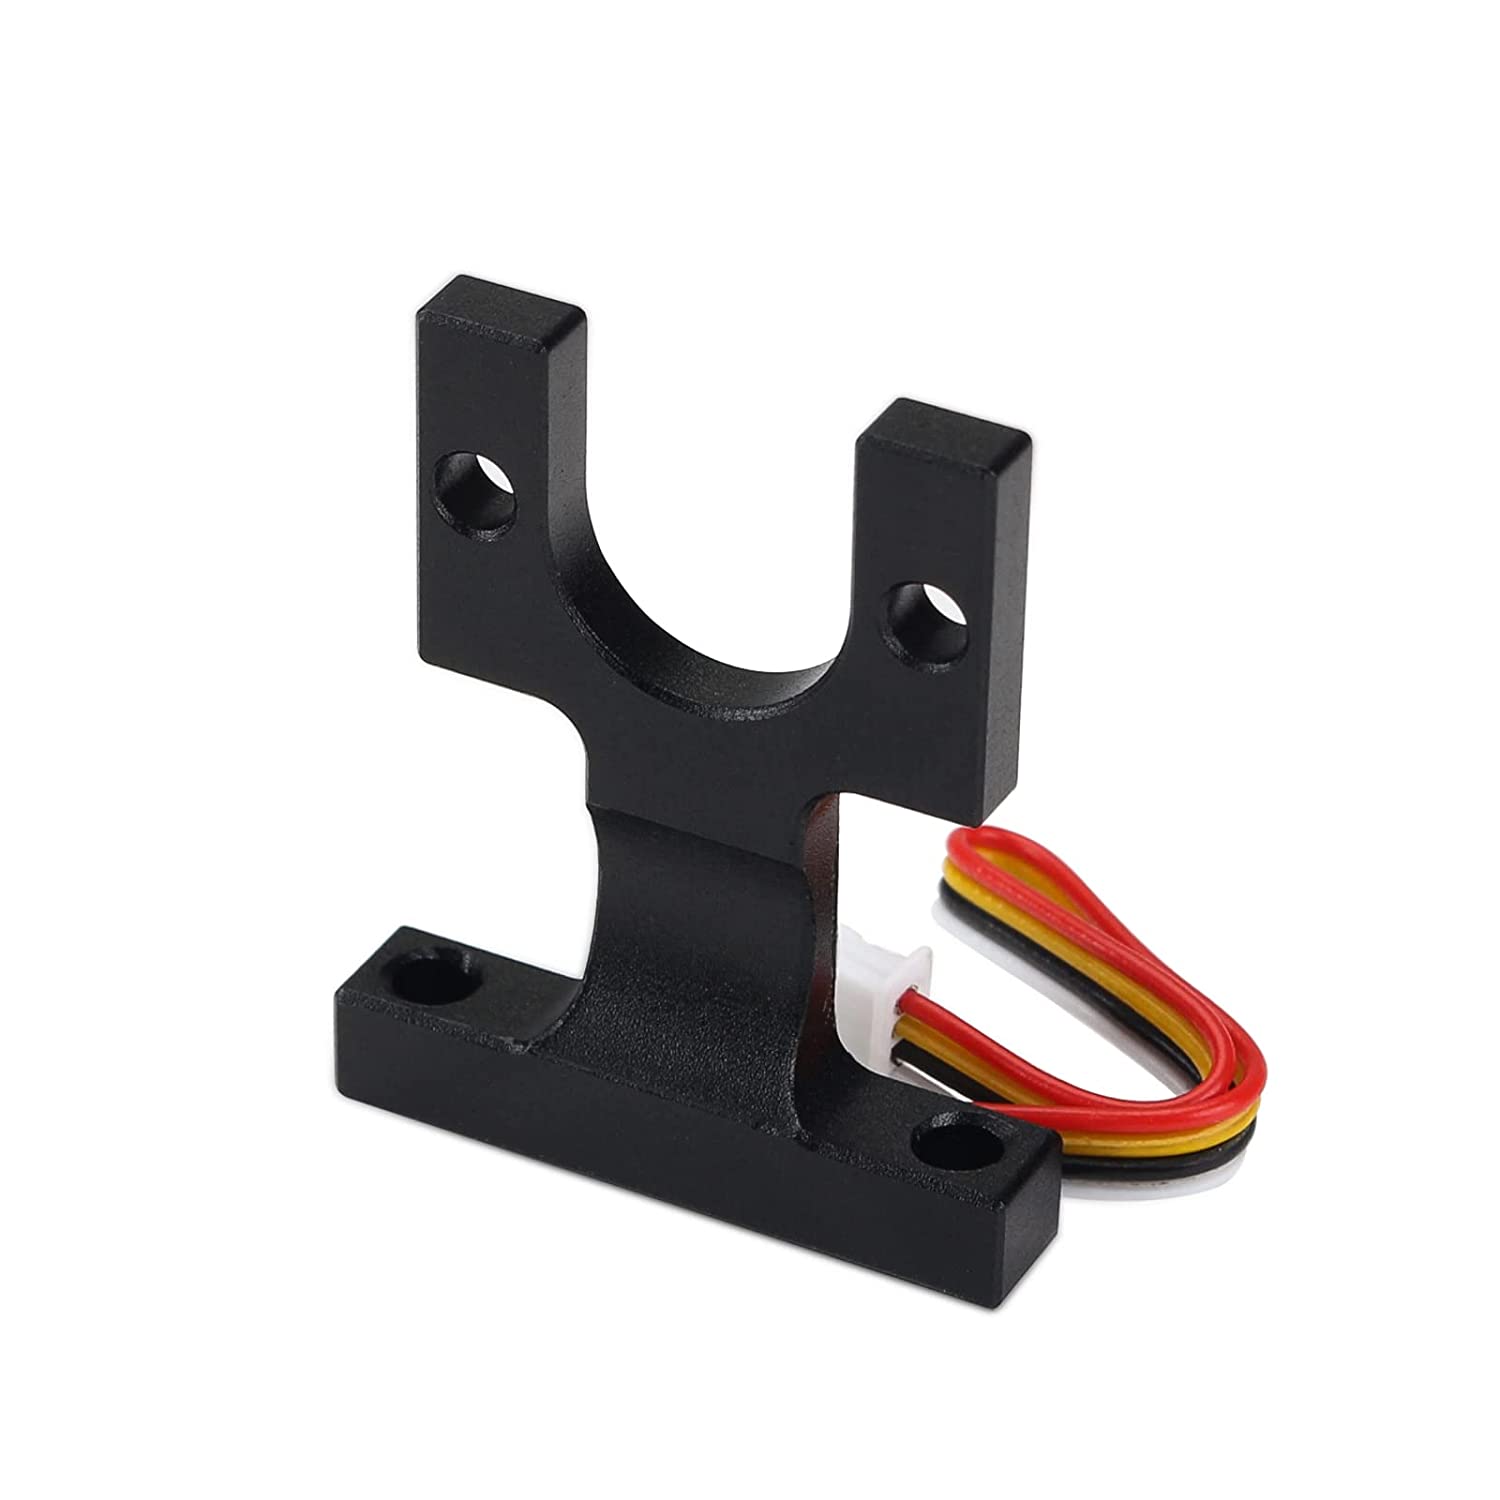 ANYCUBIC Vyper Auto Bed Levelling Strain Gauge Sensor + Mounting Block